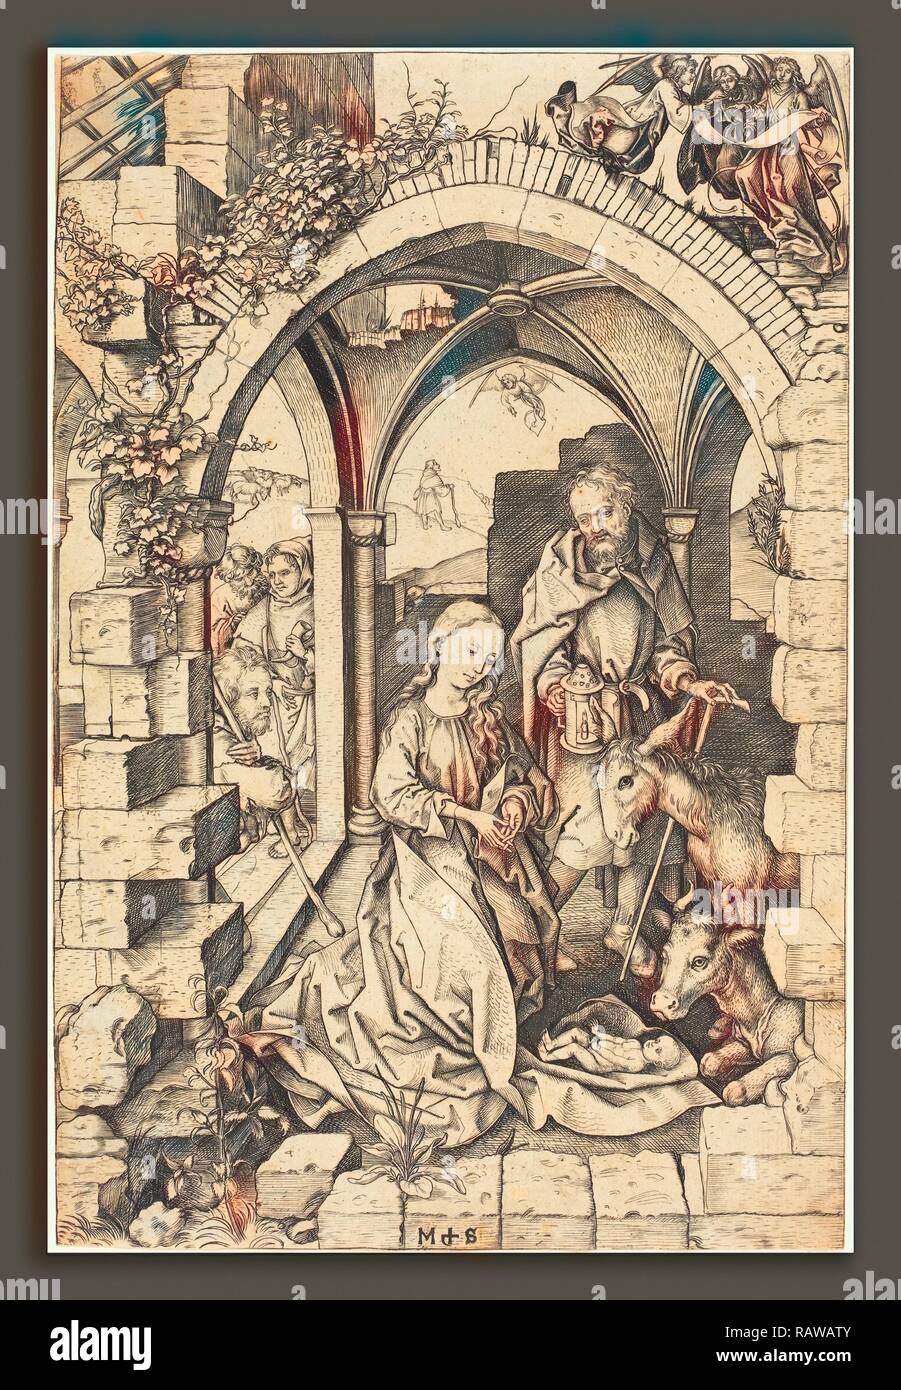 Martin Schongauer (German, c. 1450 - 1491), The Nativity, c. 1470-1475, engraving on laid paper. Reimagined Stock Photo